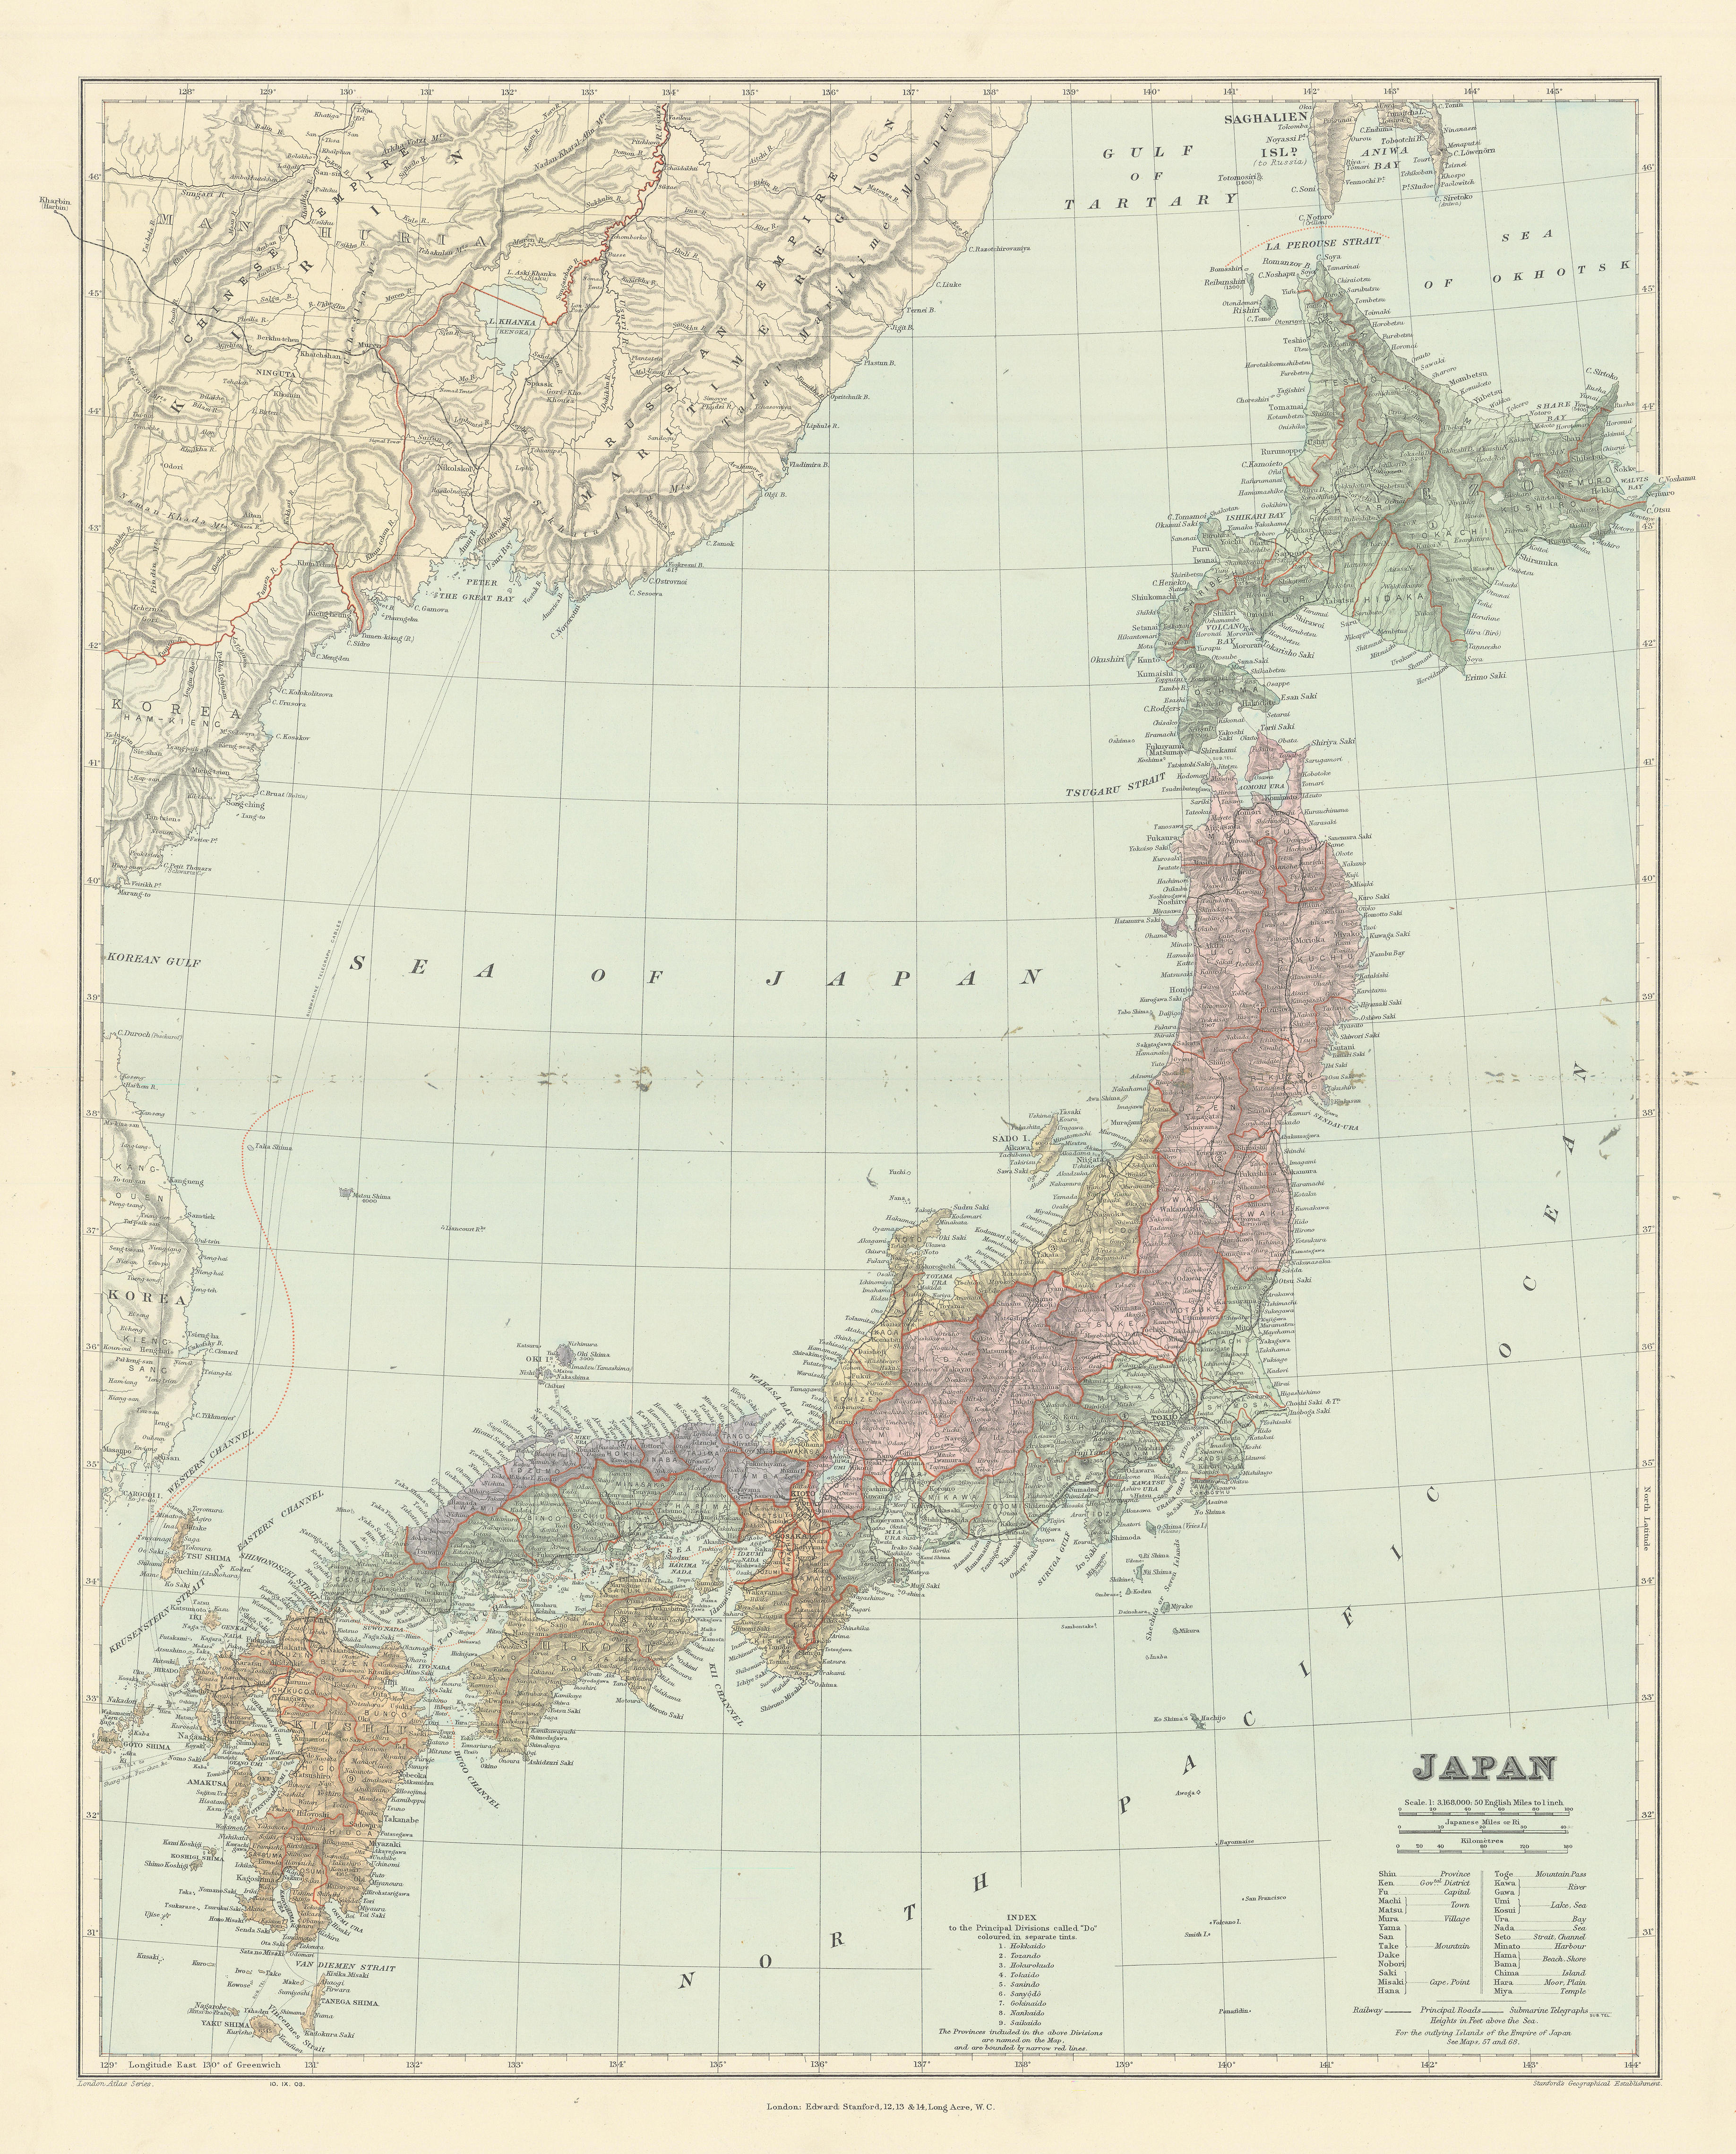 Associate Product The Islands of Japan, in Provinces/prefectures. 65x52cm. STANFORD 1904 old map